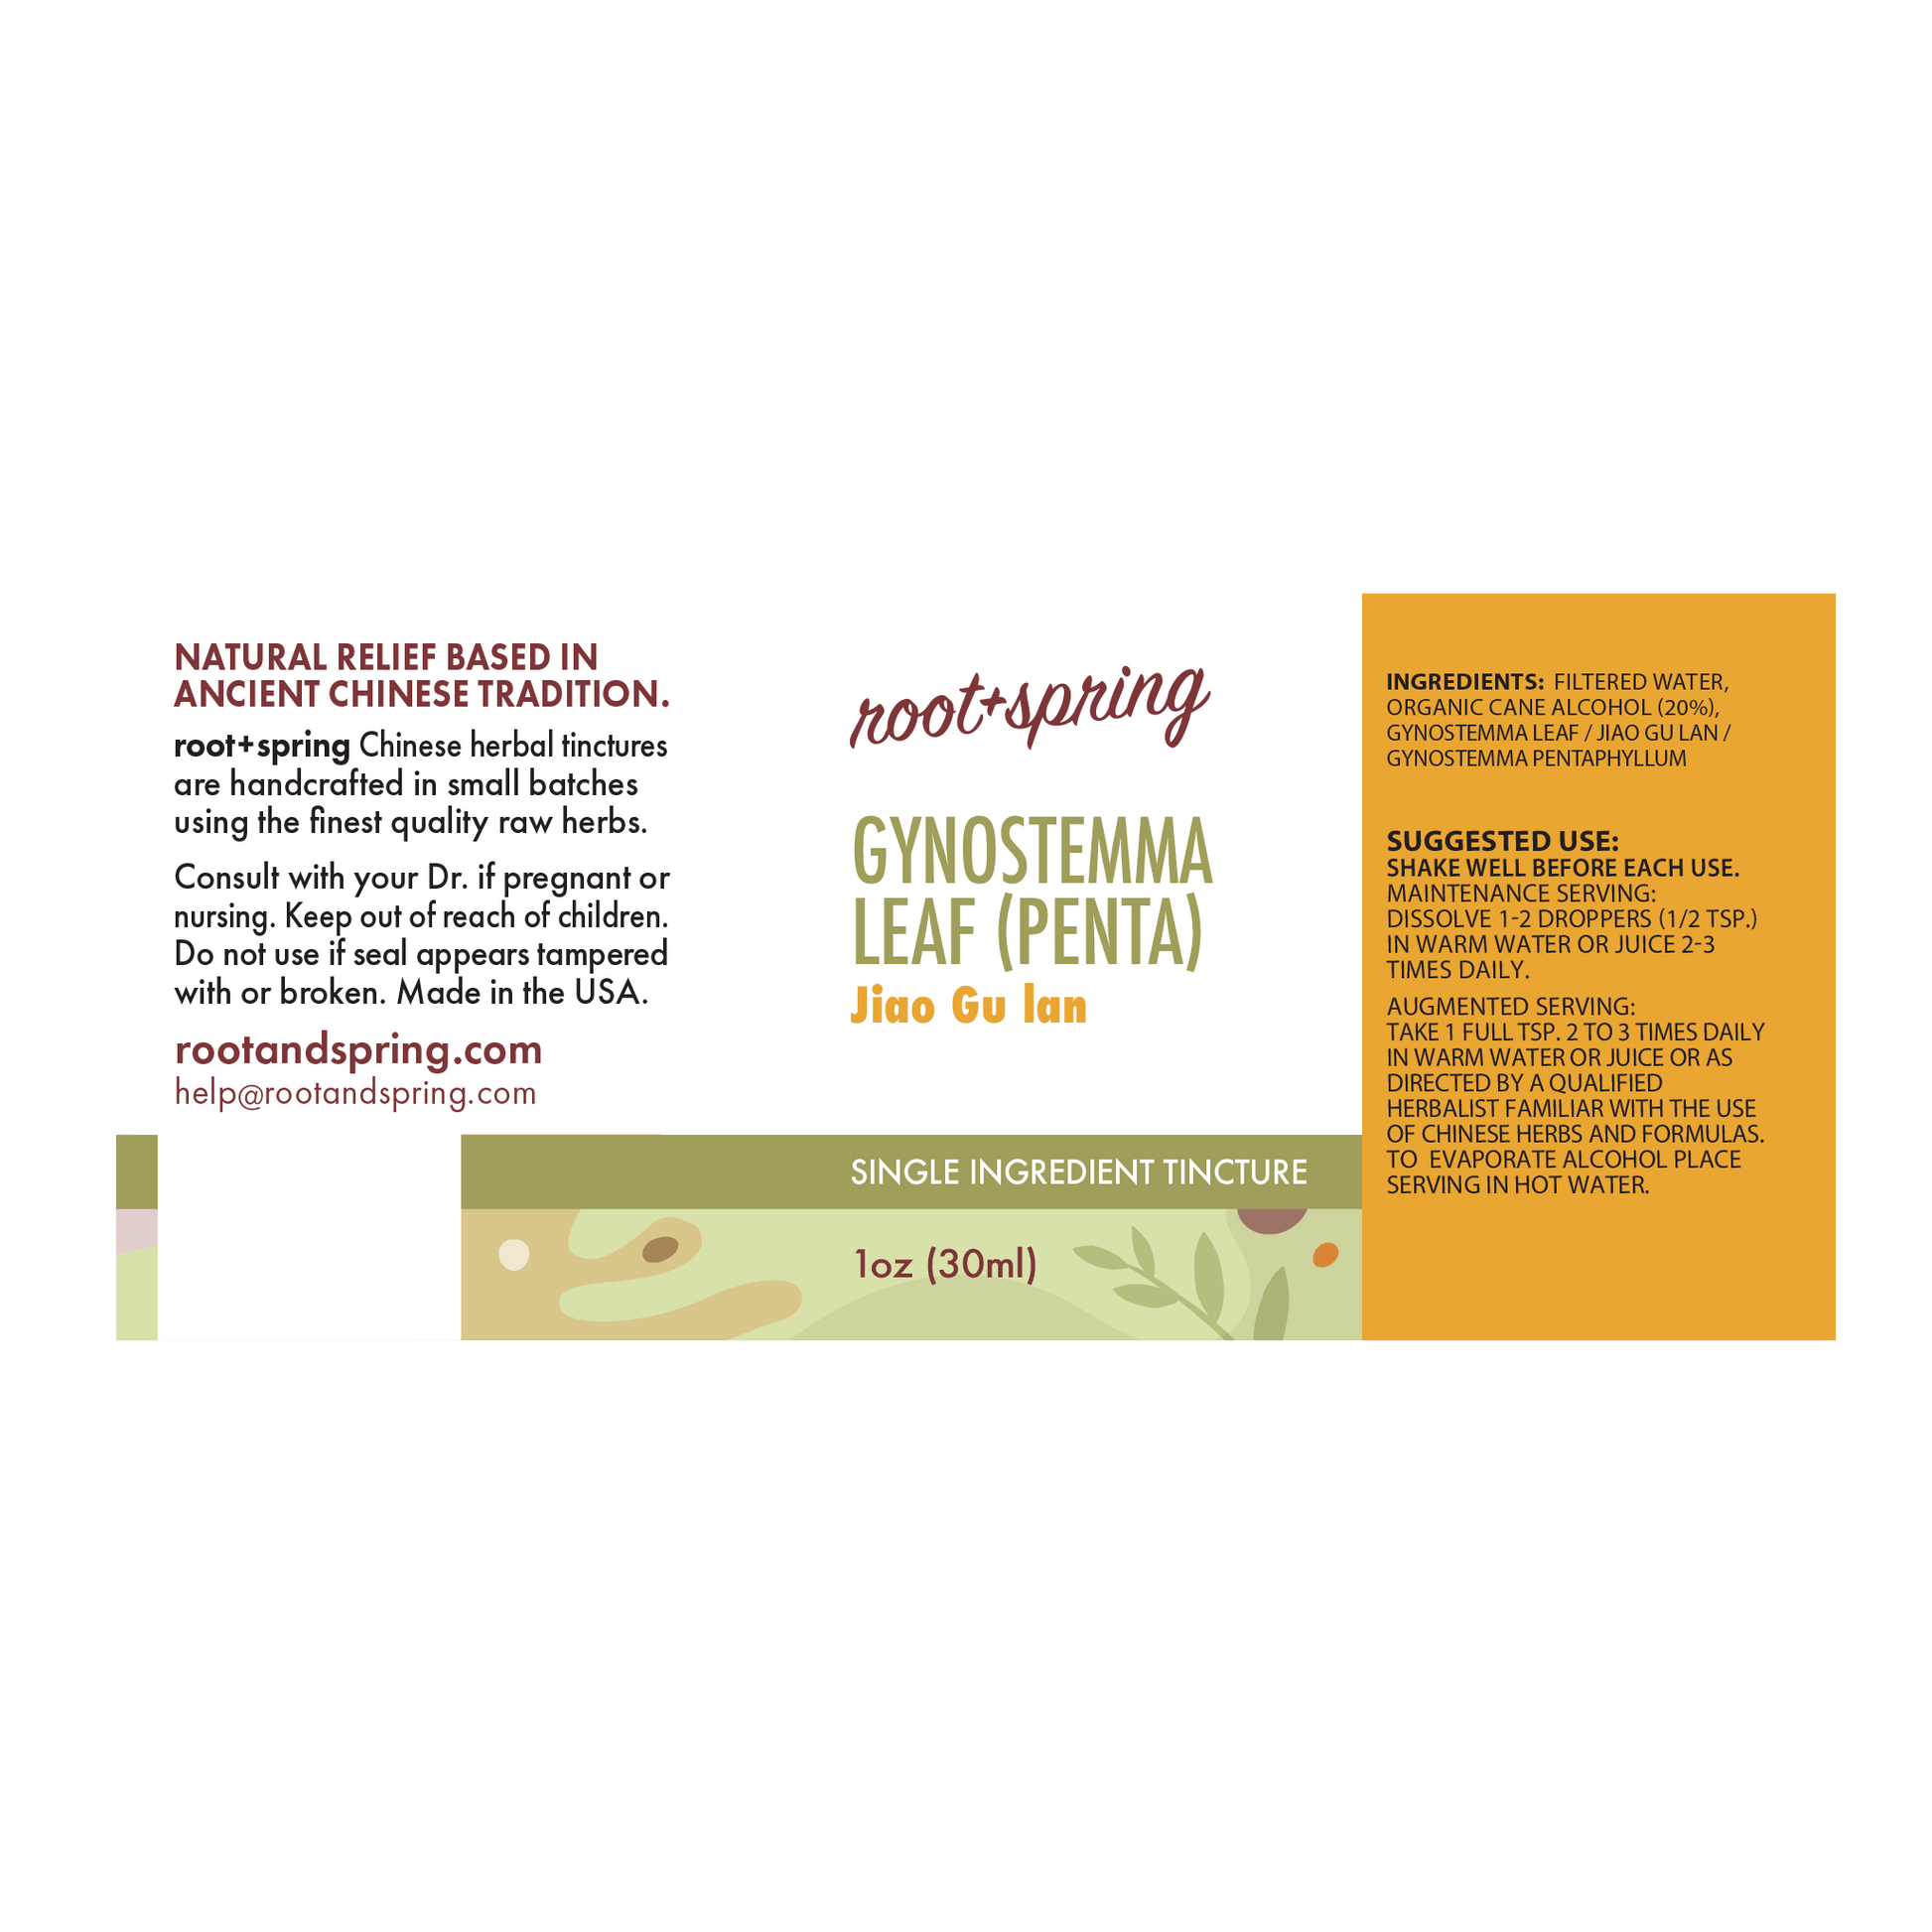 Label with Ingredients, Suggested Use, and Precautions for root + spring Gynostemma Leaf Penta Jiao Gu Lan Chinese herbal tincture.